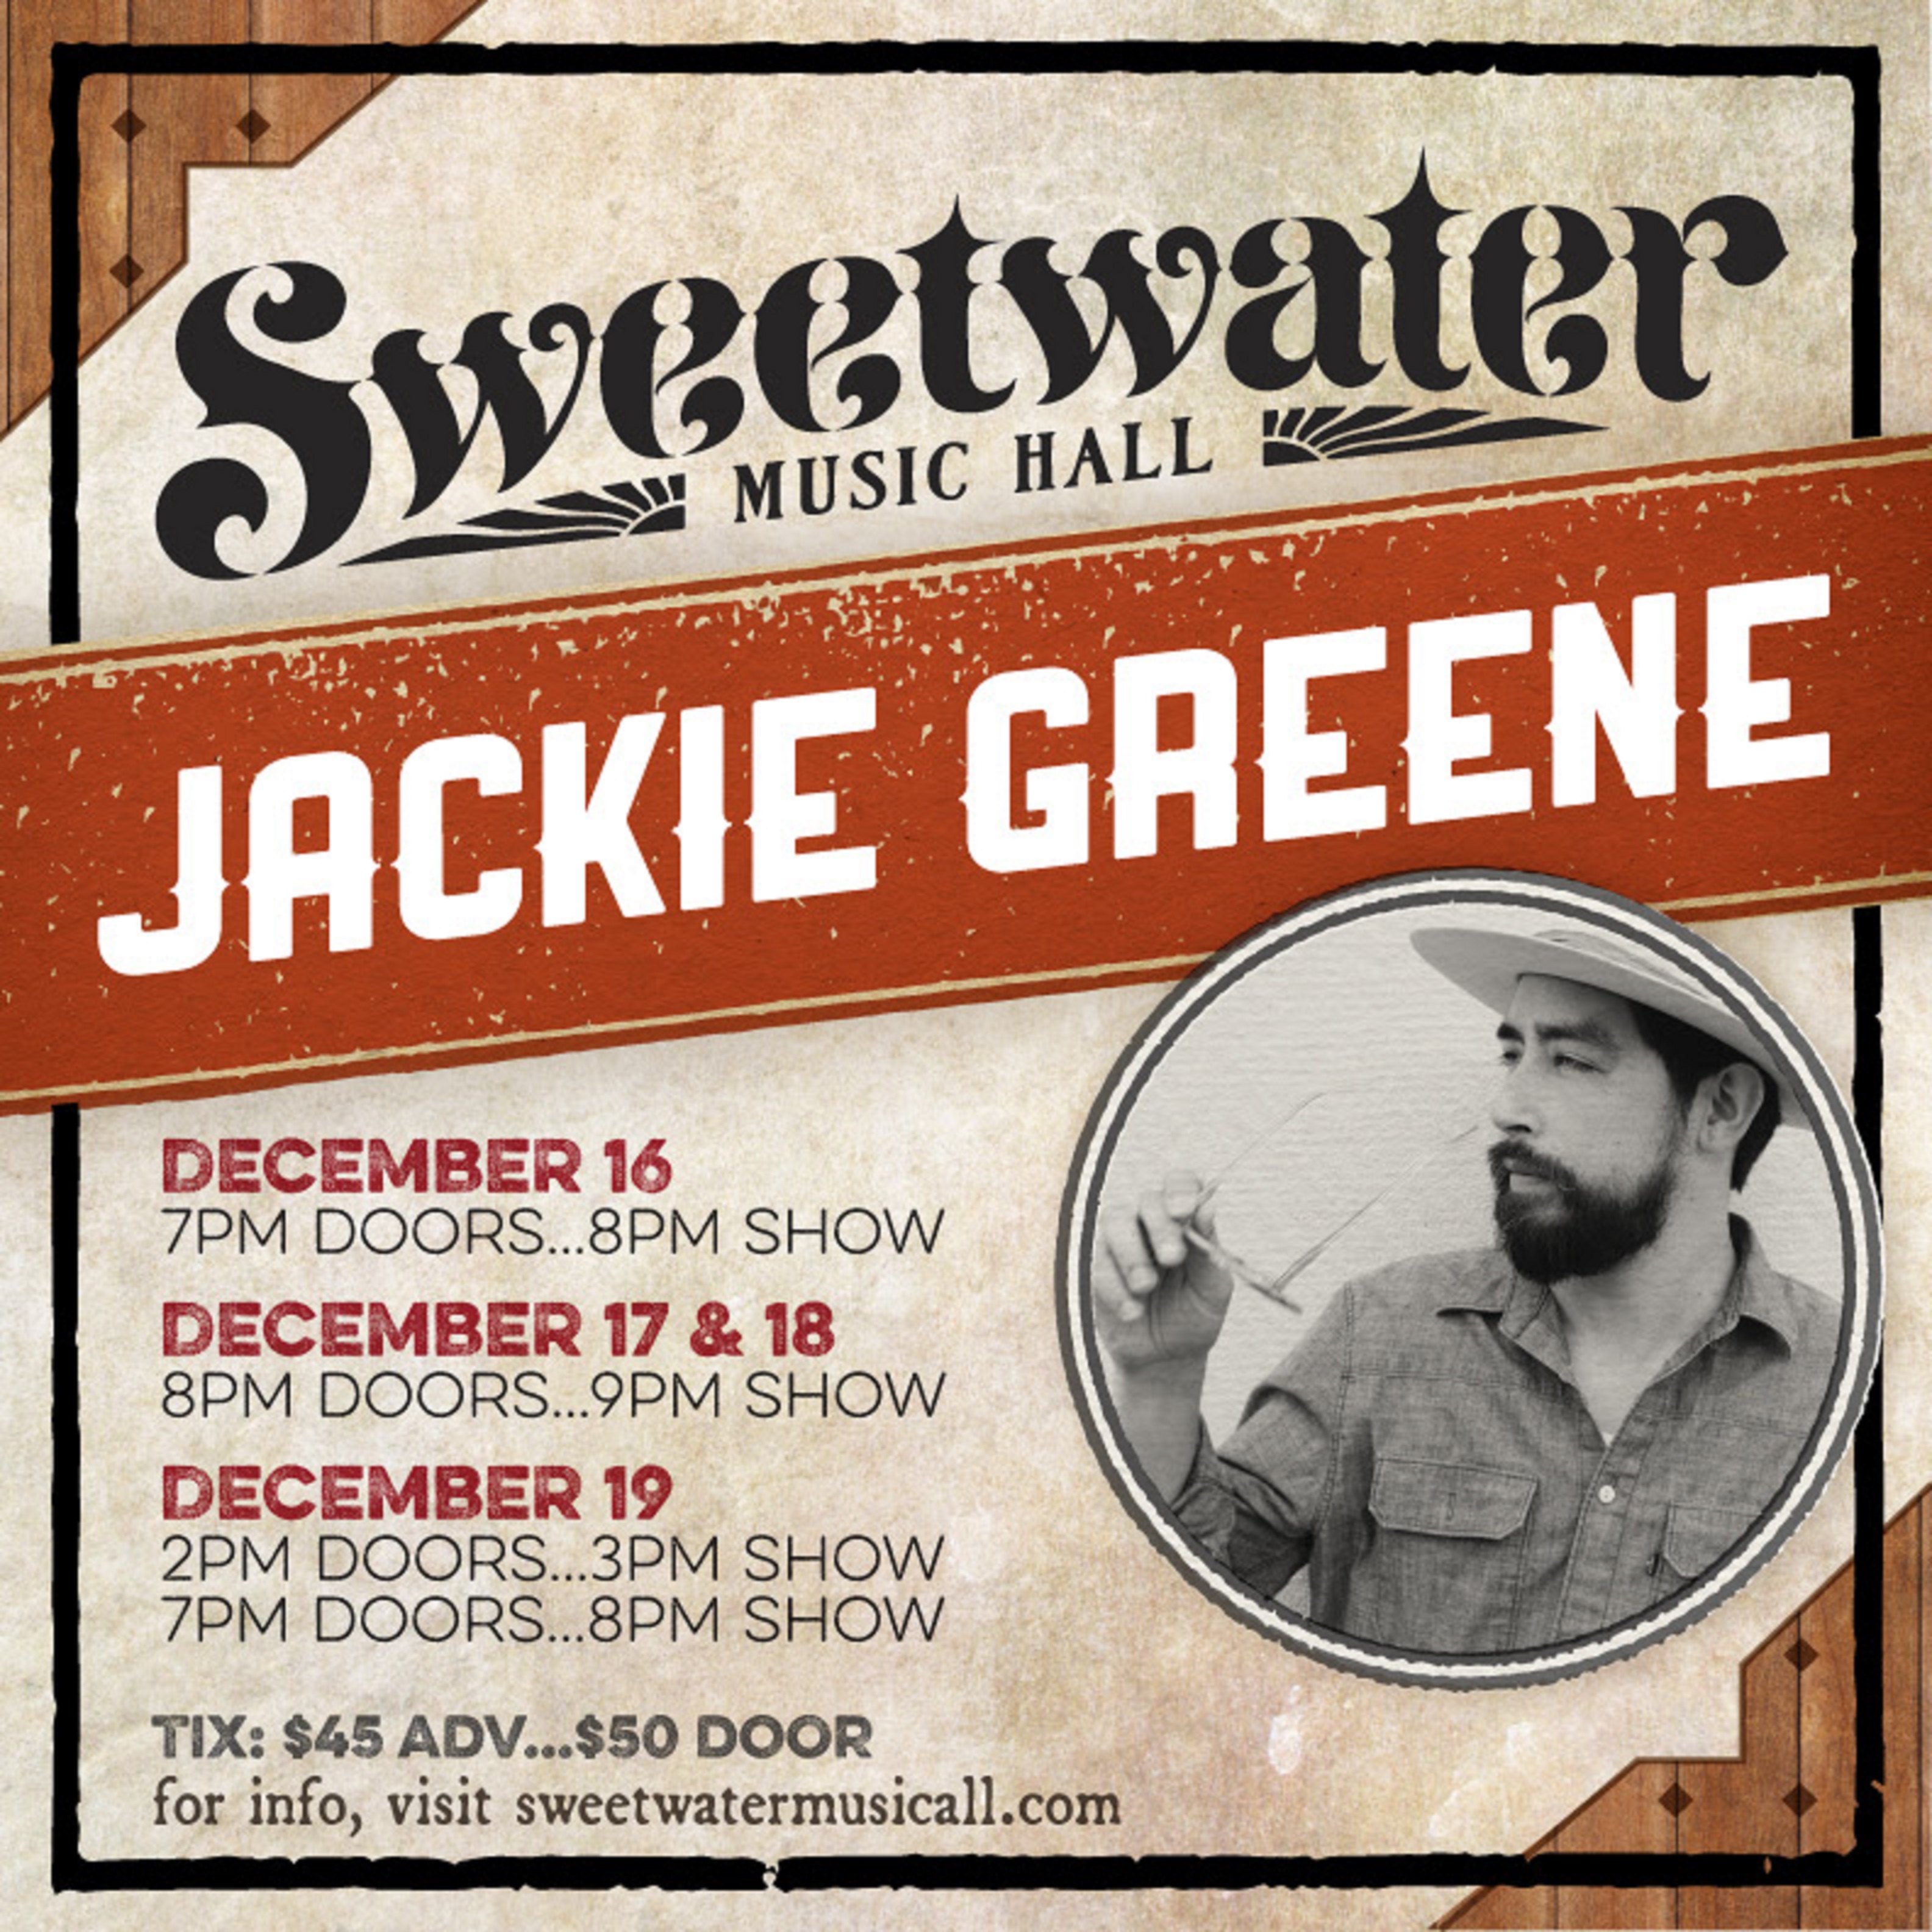 Sweetwater Music Hall Welcomes Jackie Greene For 5 Show Residency